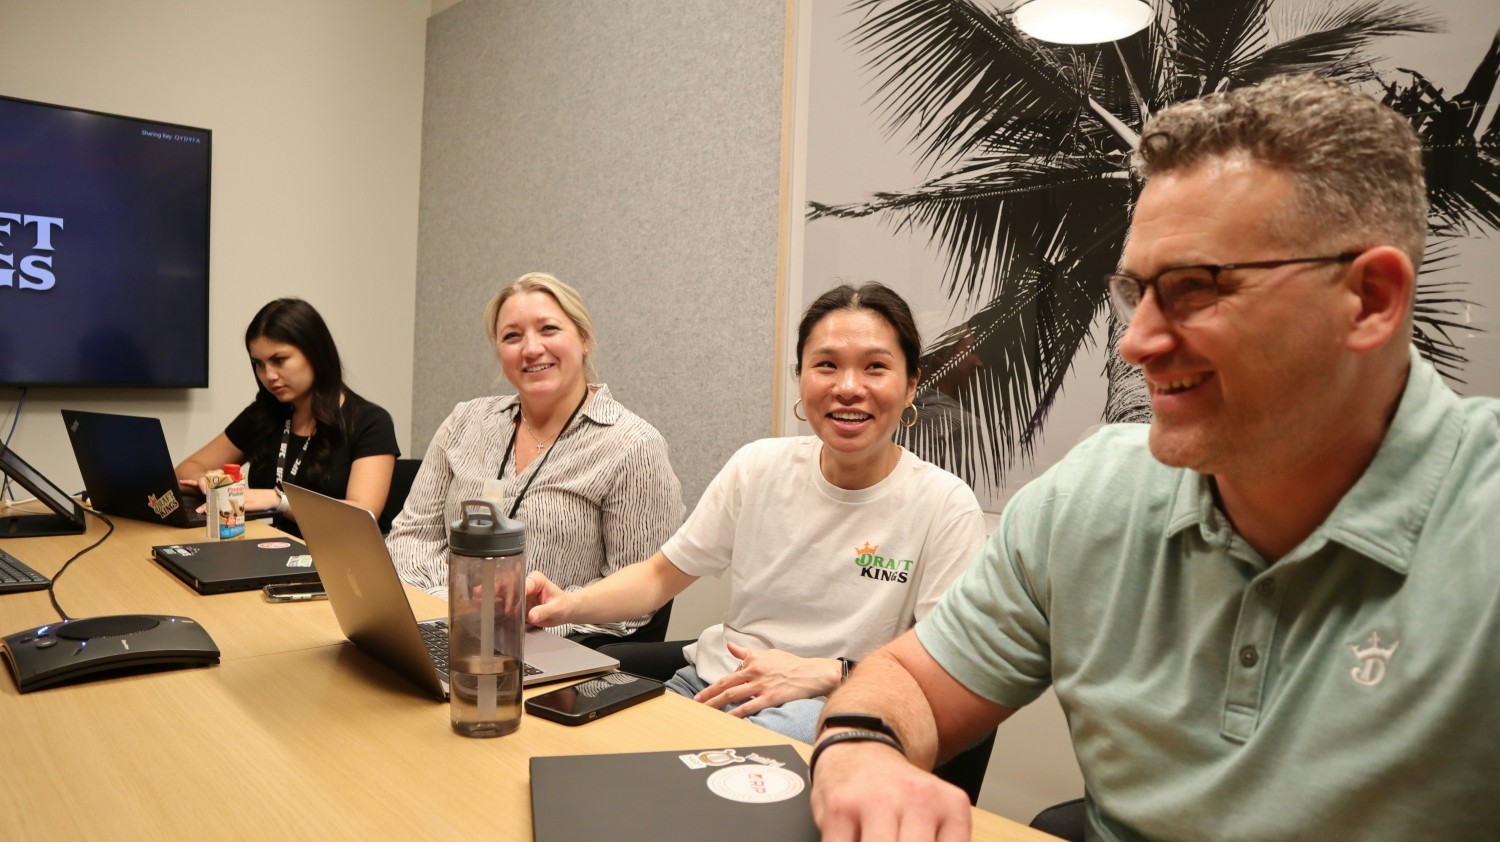 Team members meet together in one of our many conference rooms in our office spaces.